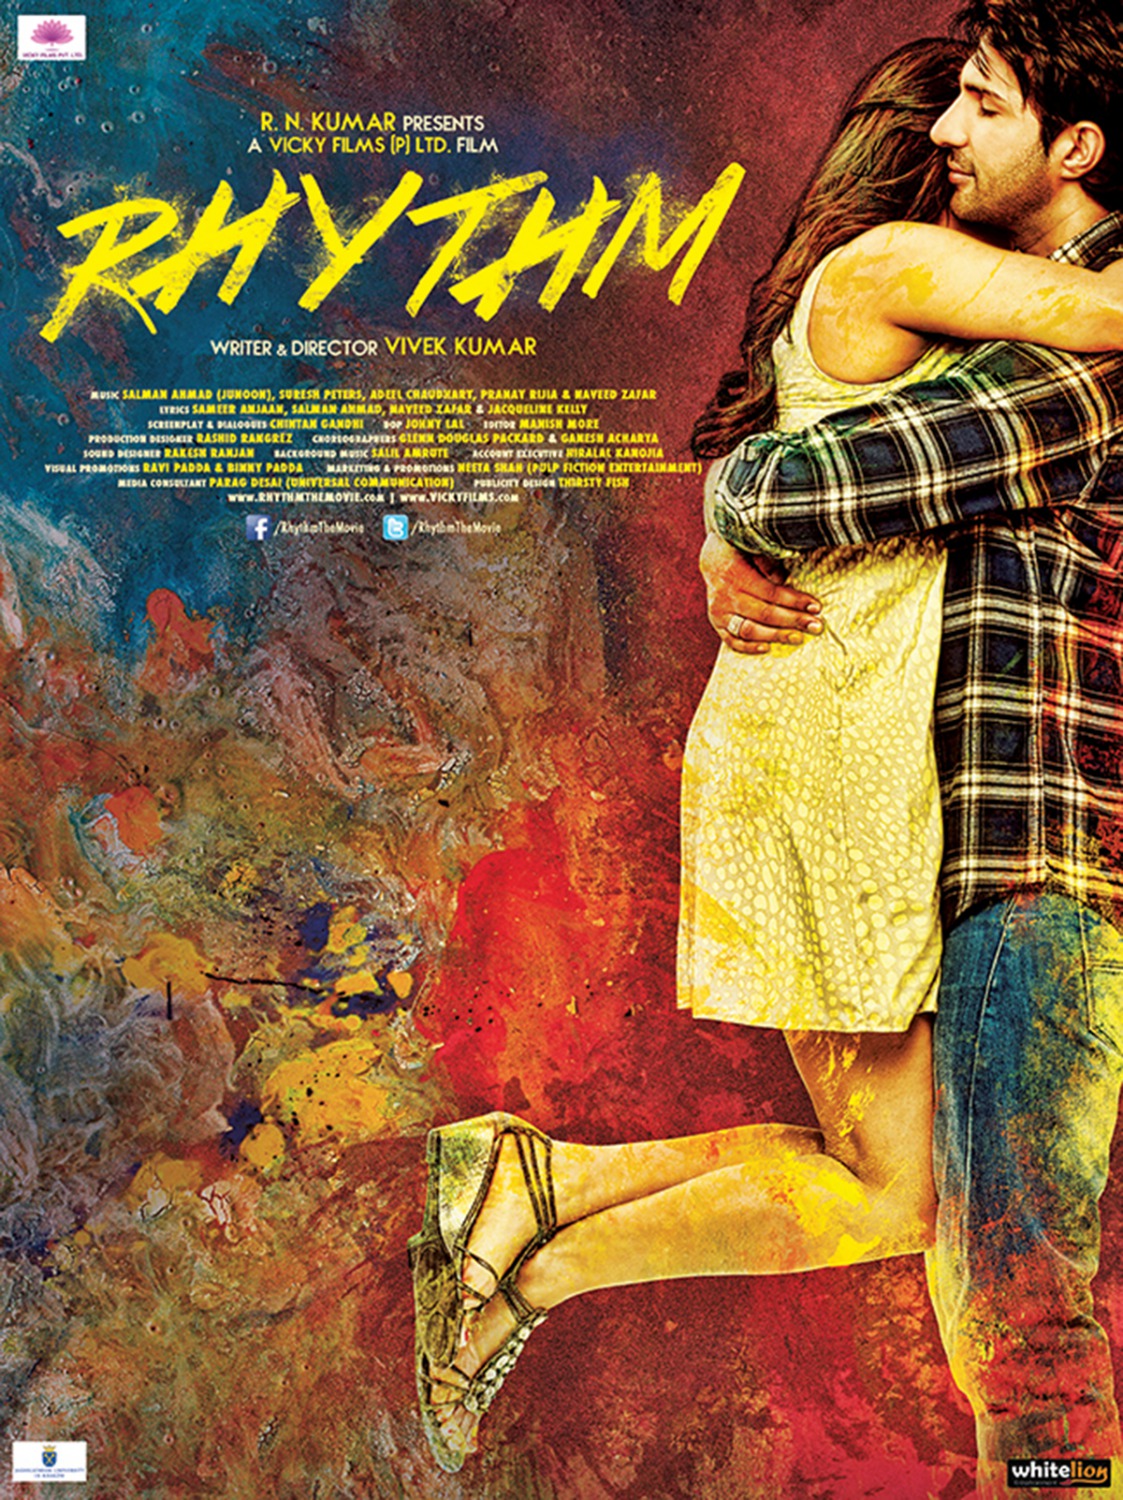 Extra Large Movie Poster Image for Rhythm (#3 of 3)